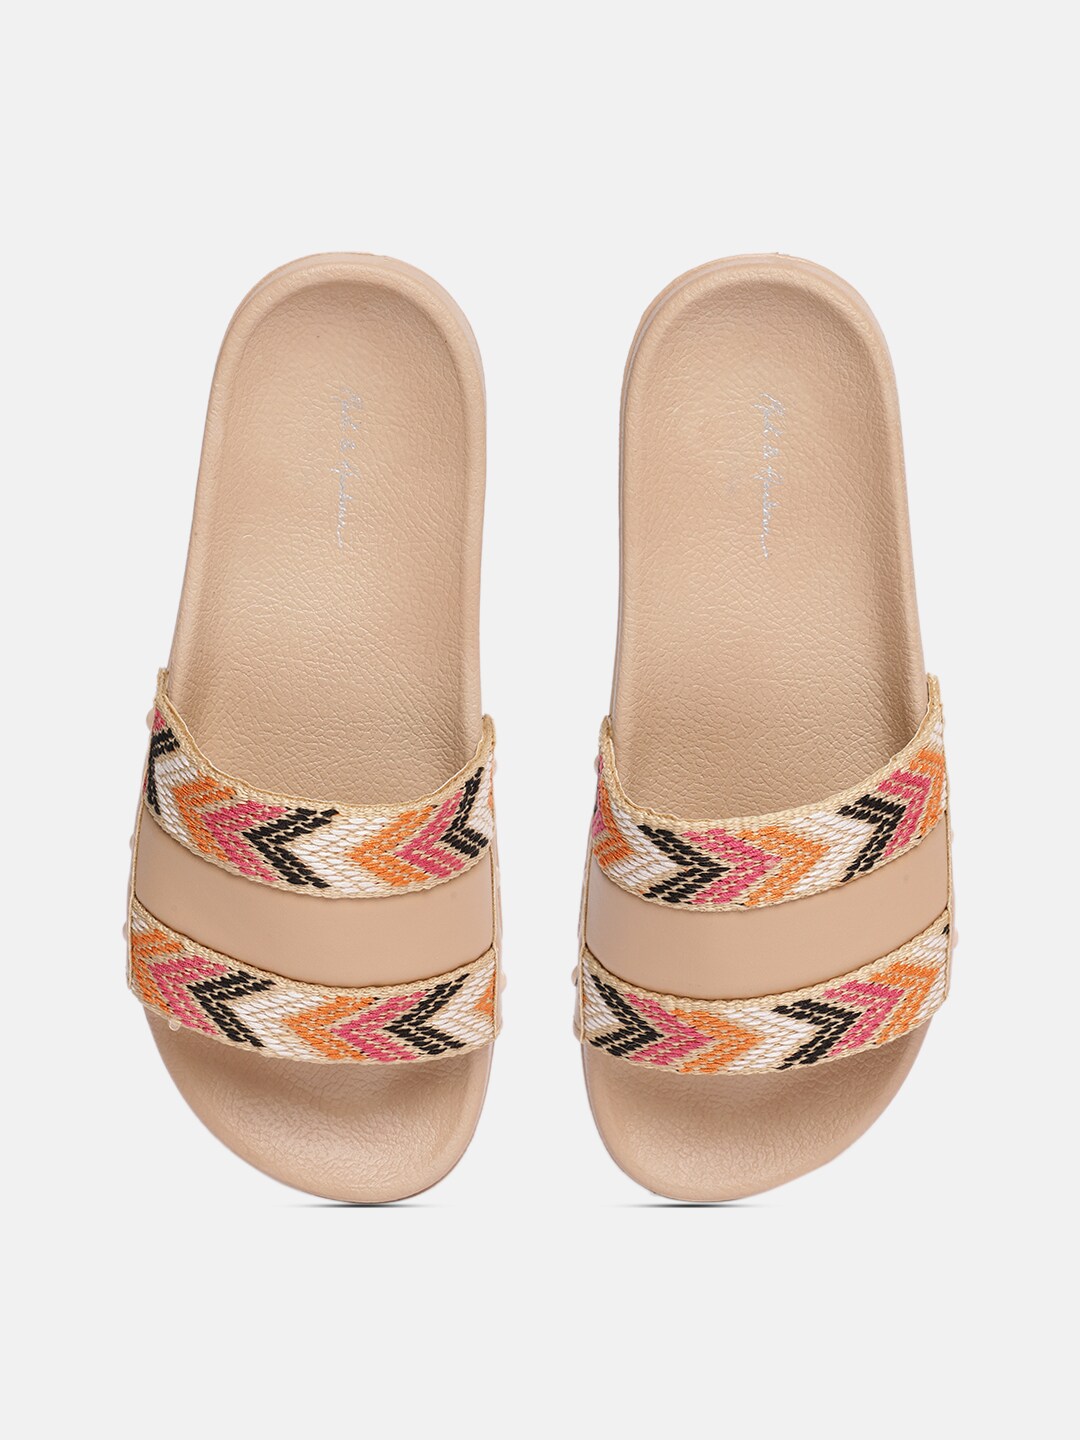 Mast & Harbour Women Beige Embroidered Sliders Price in India